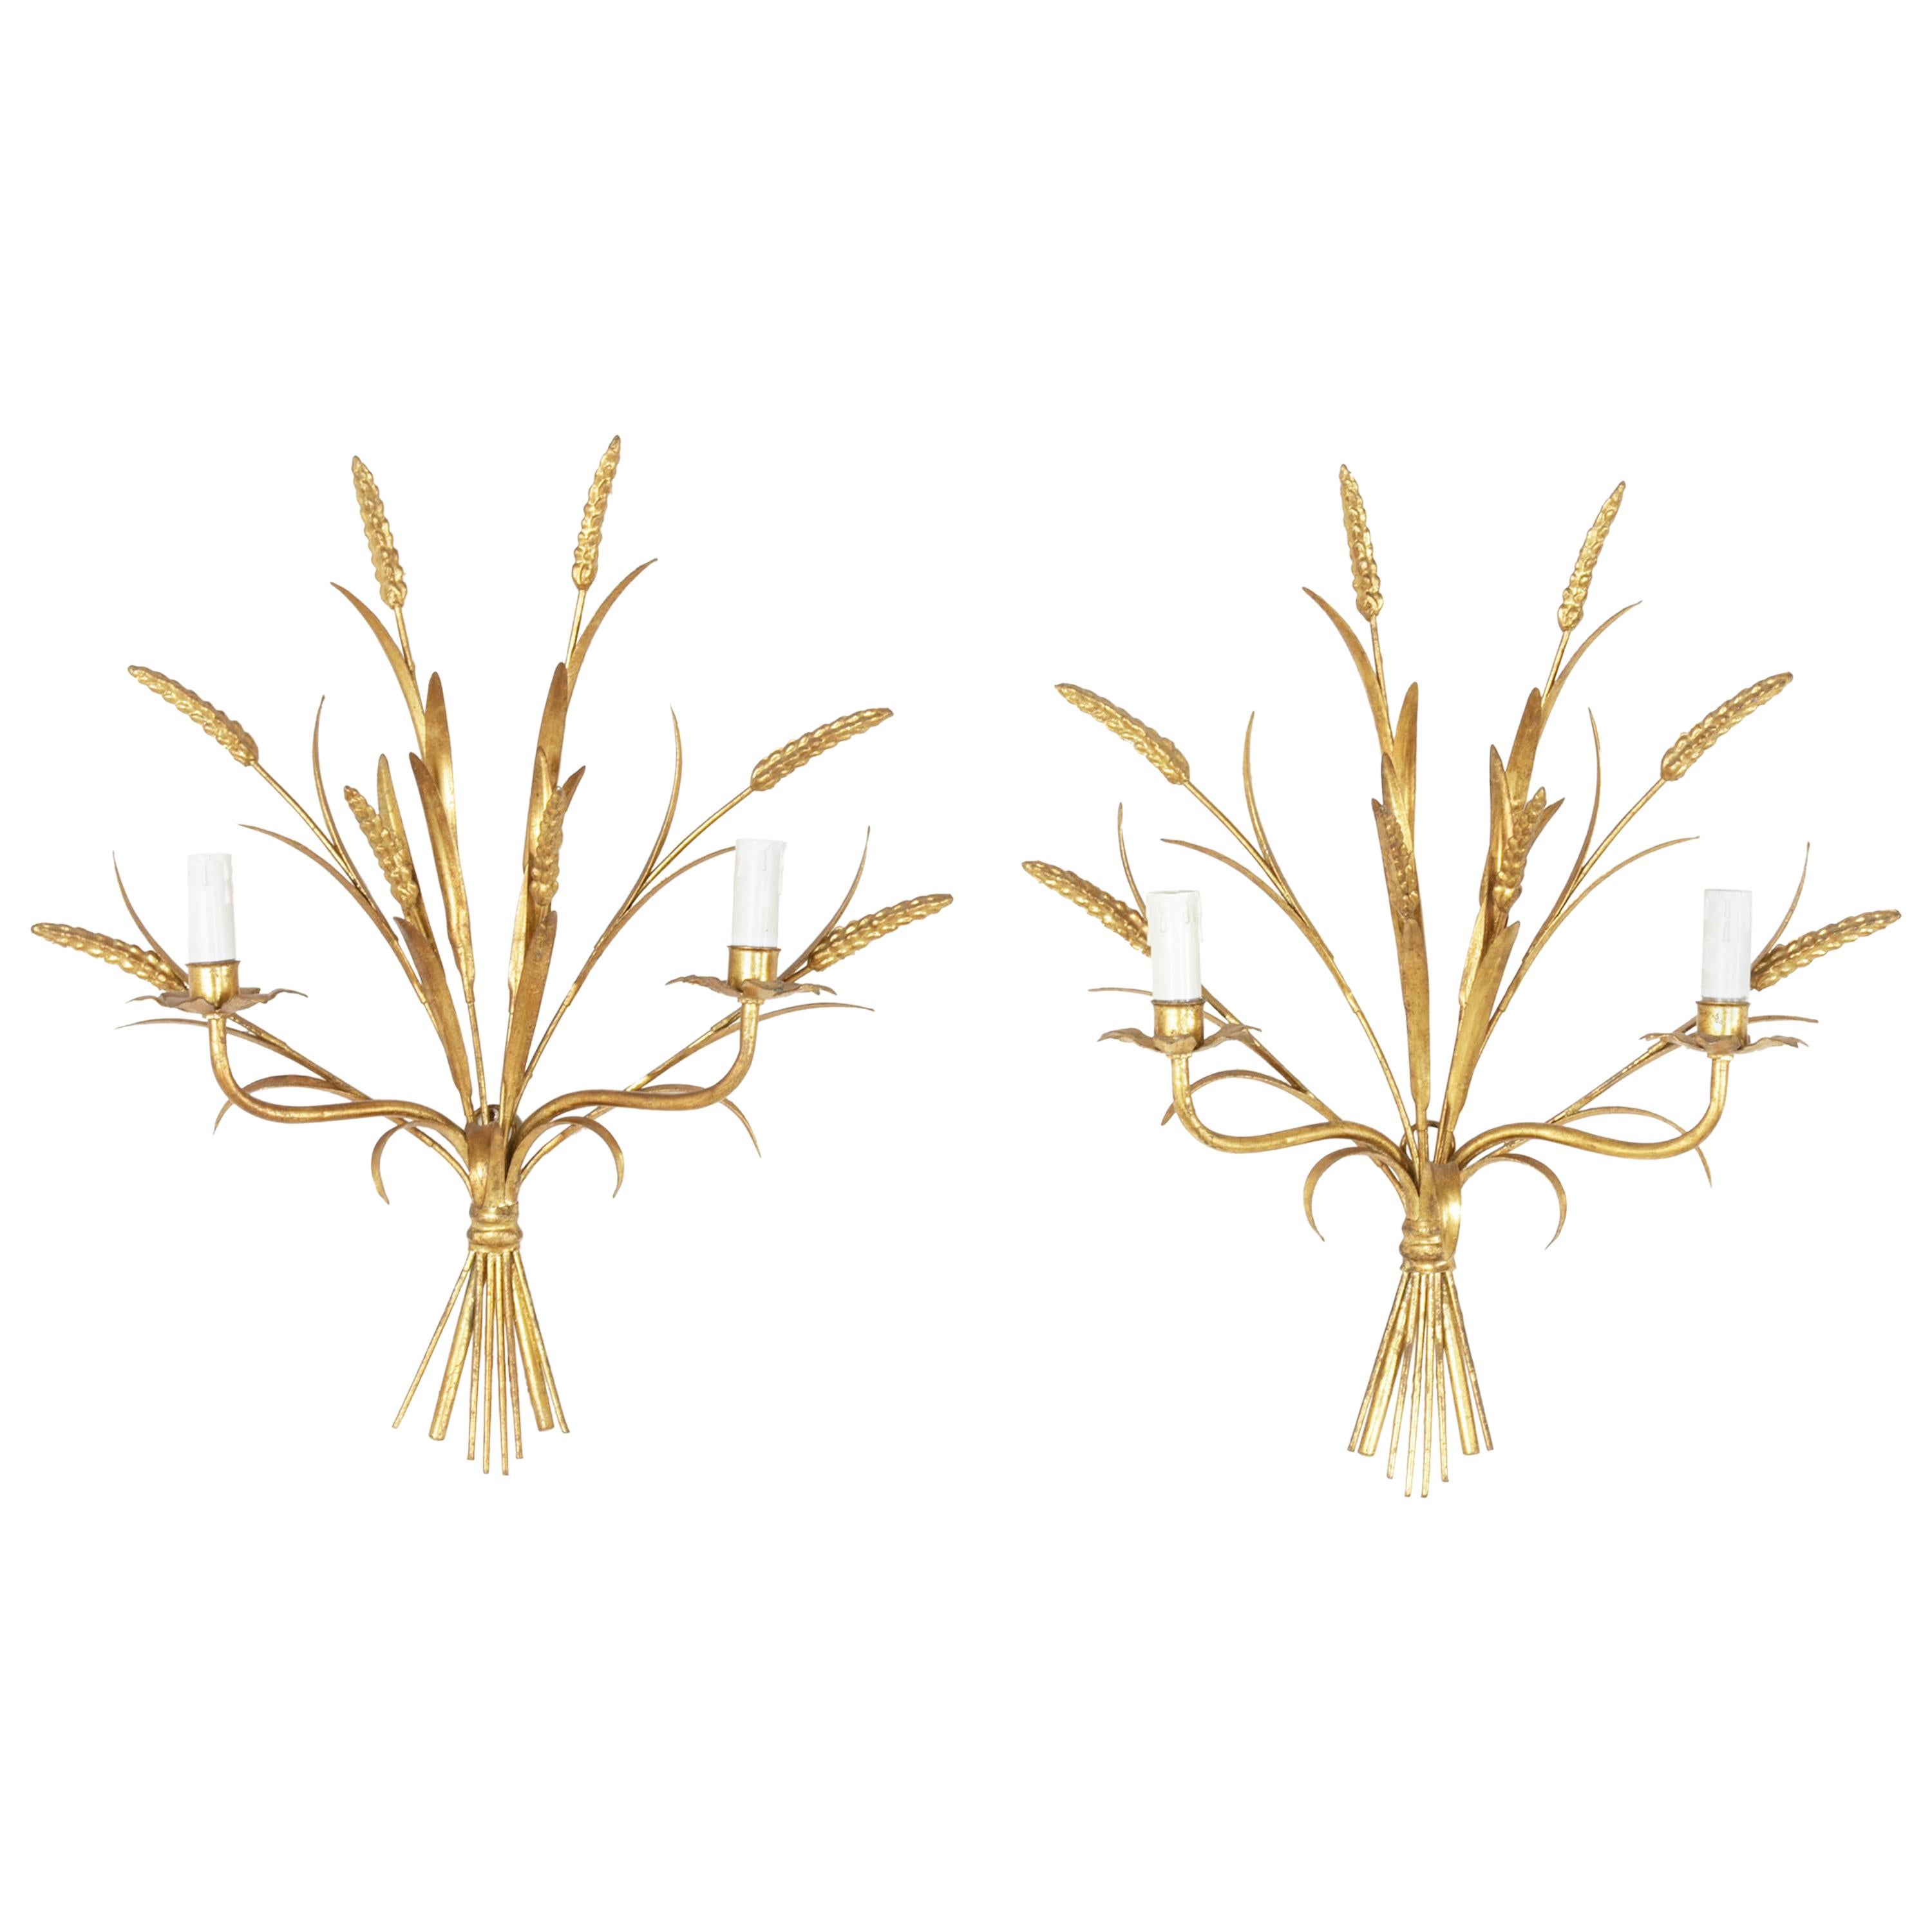 Pair of Mid-20th Century Large Italian Gilt Metal Wall Sconces with Wheat Motif